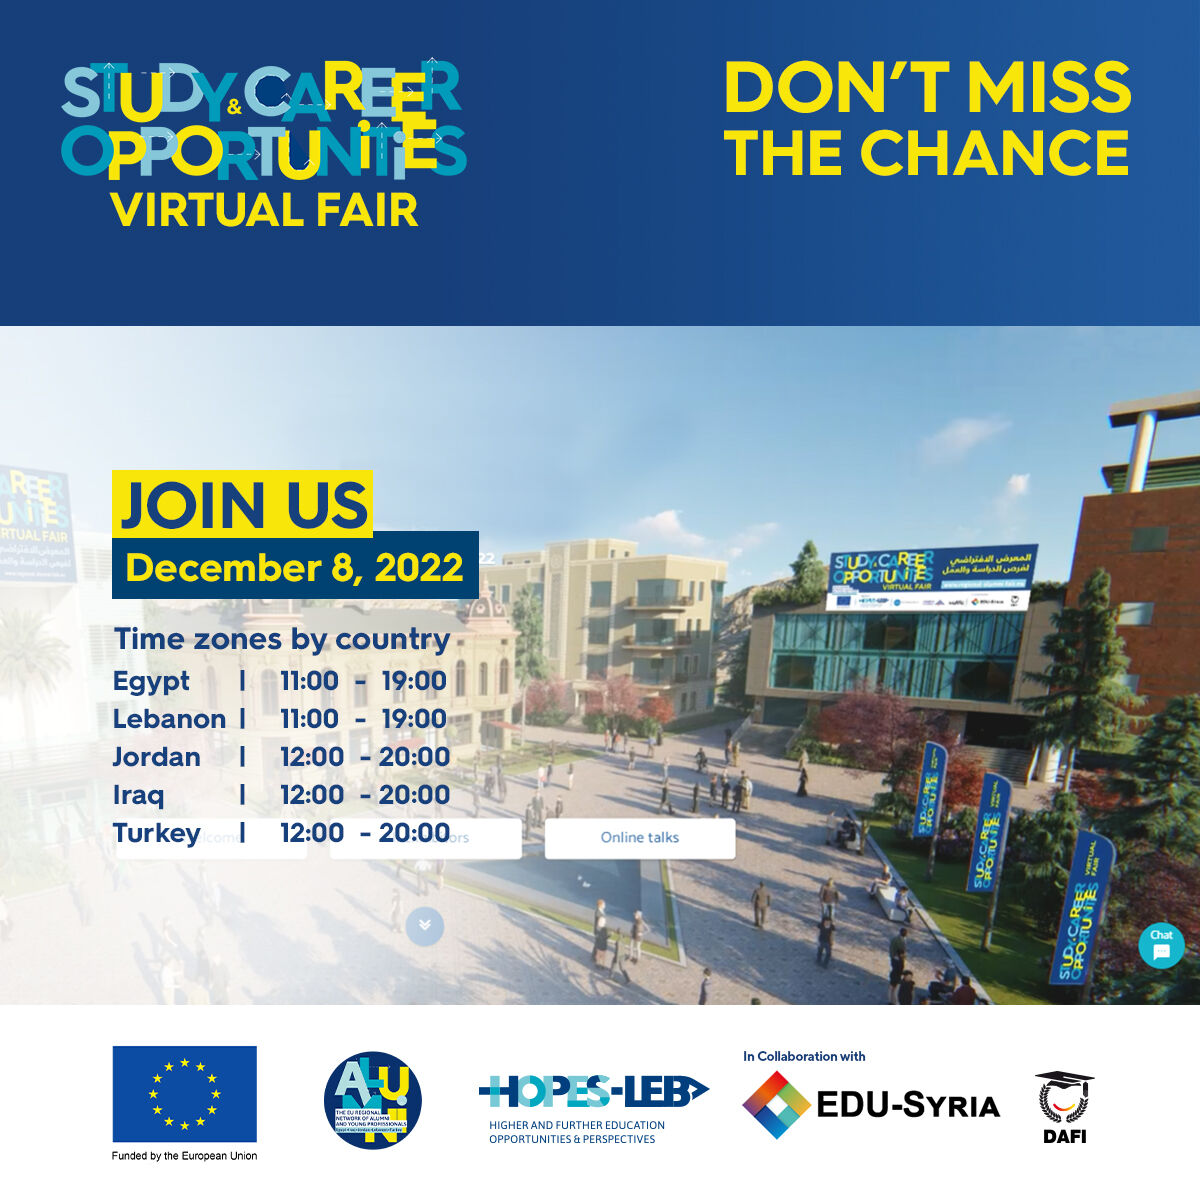 Don't miss your chance to attend the Study and Career Opportunities Virtual Fair Tomorrow, Thursday Dec 8! Checkout the event time across different time zones. Confirm your attendance with a comment. See you there! #HOPESLEBproject #EUinLebanon #StudyCareer #virtualfair